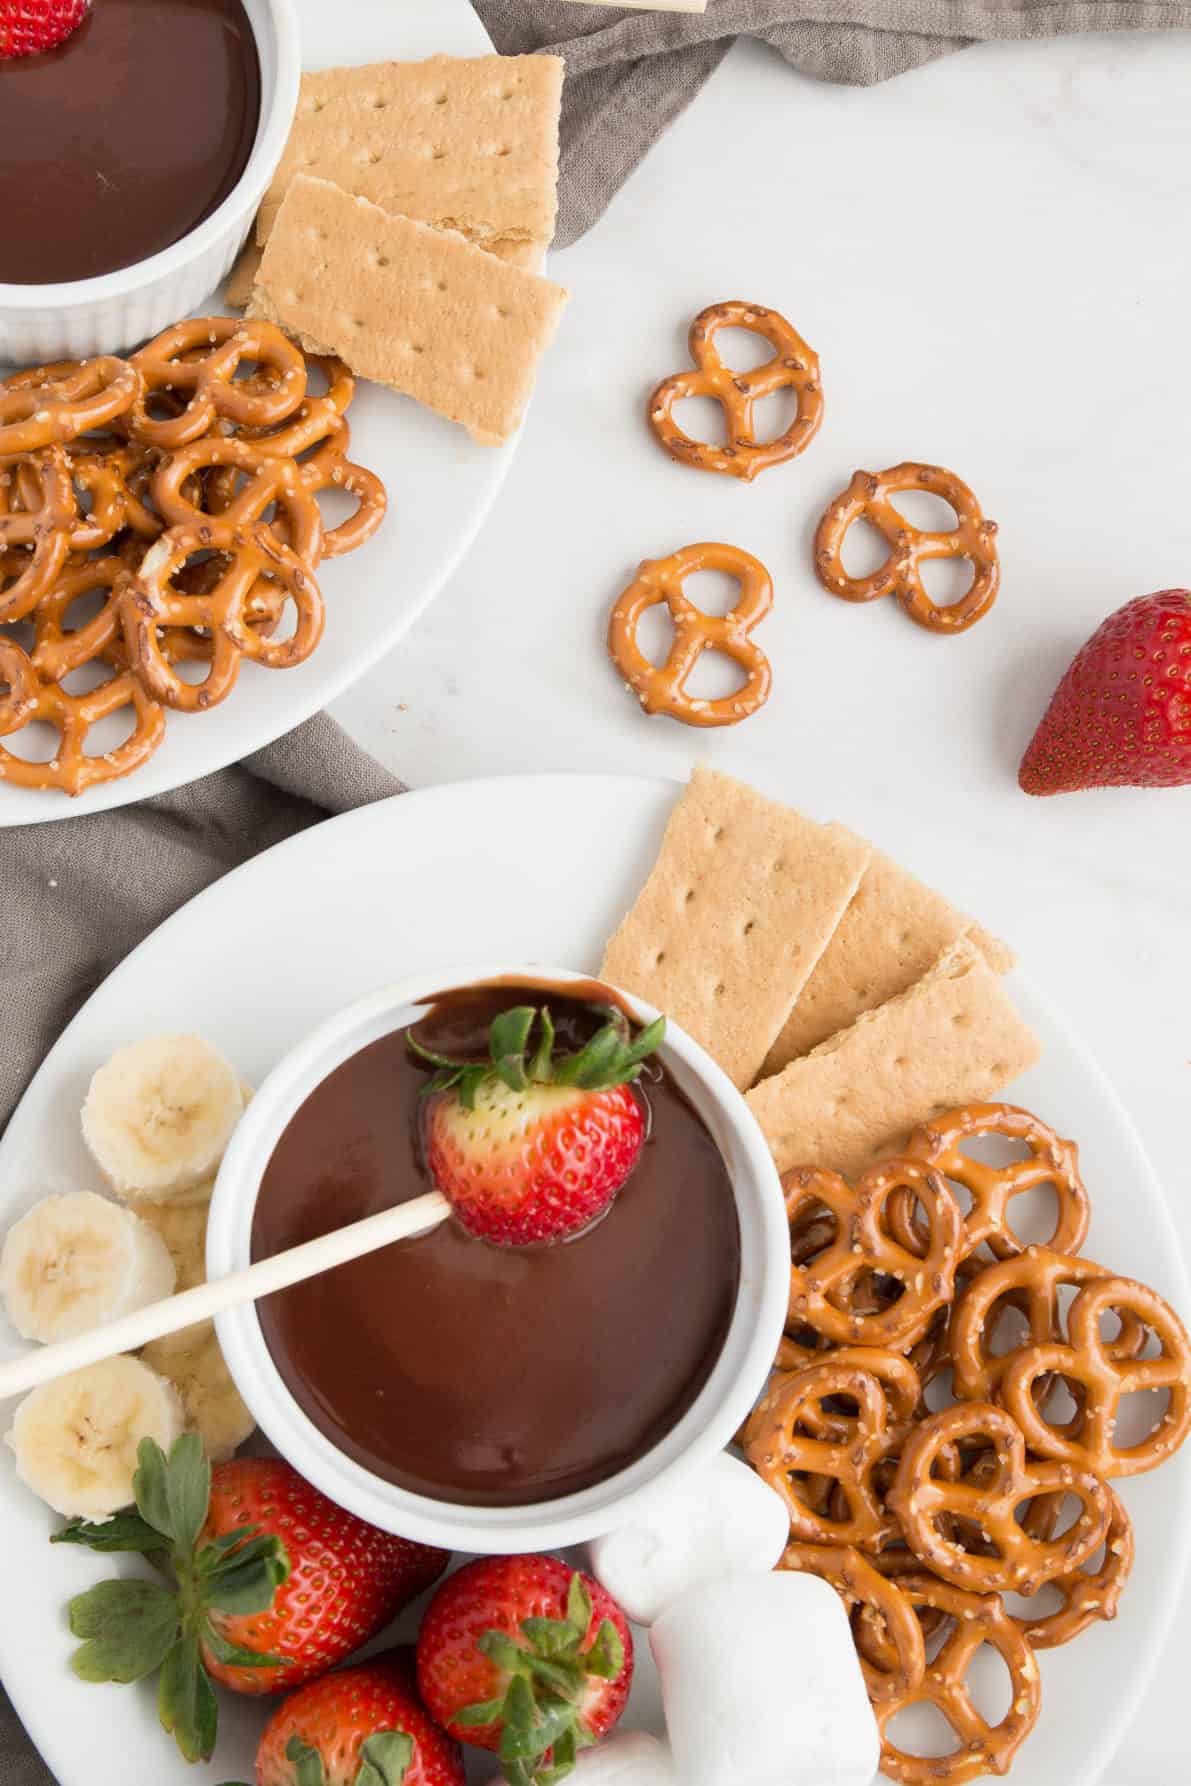 Chocolate Fondue is a fun and easy dessert experience! This no-fuss recipe is silky smooth and decadent, perfect for a variety of dipping options.This dessert is sure to be at hit at an party. | wanderzestblog.com #fondue #chocolate #party #dessert #holiday